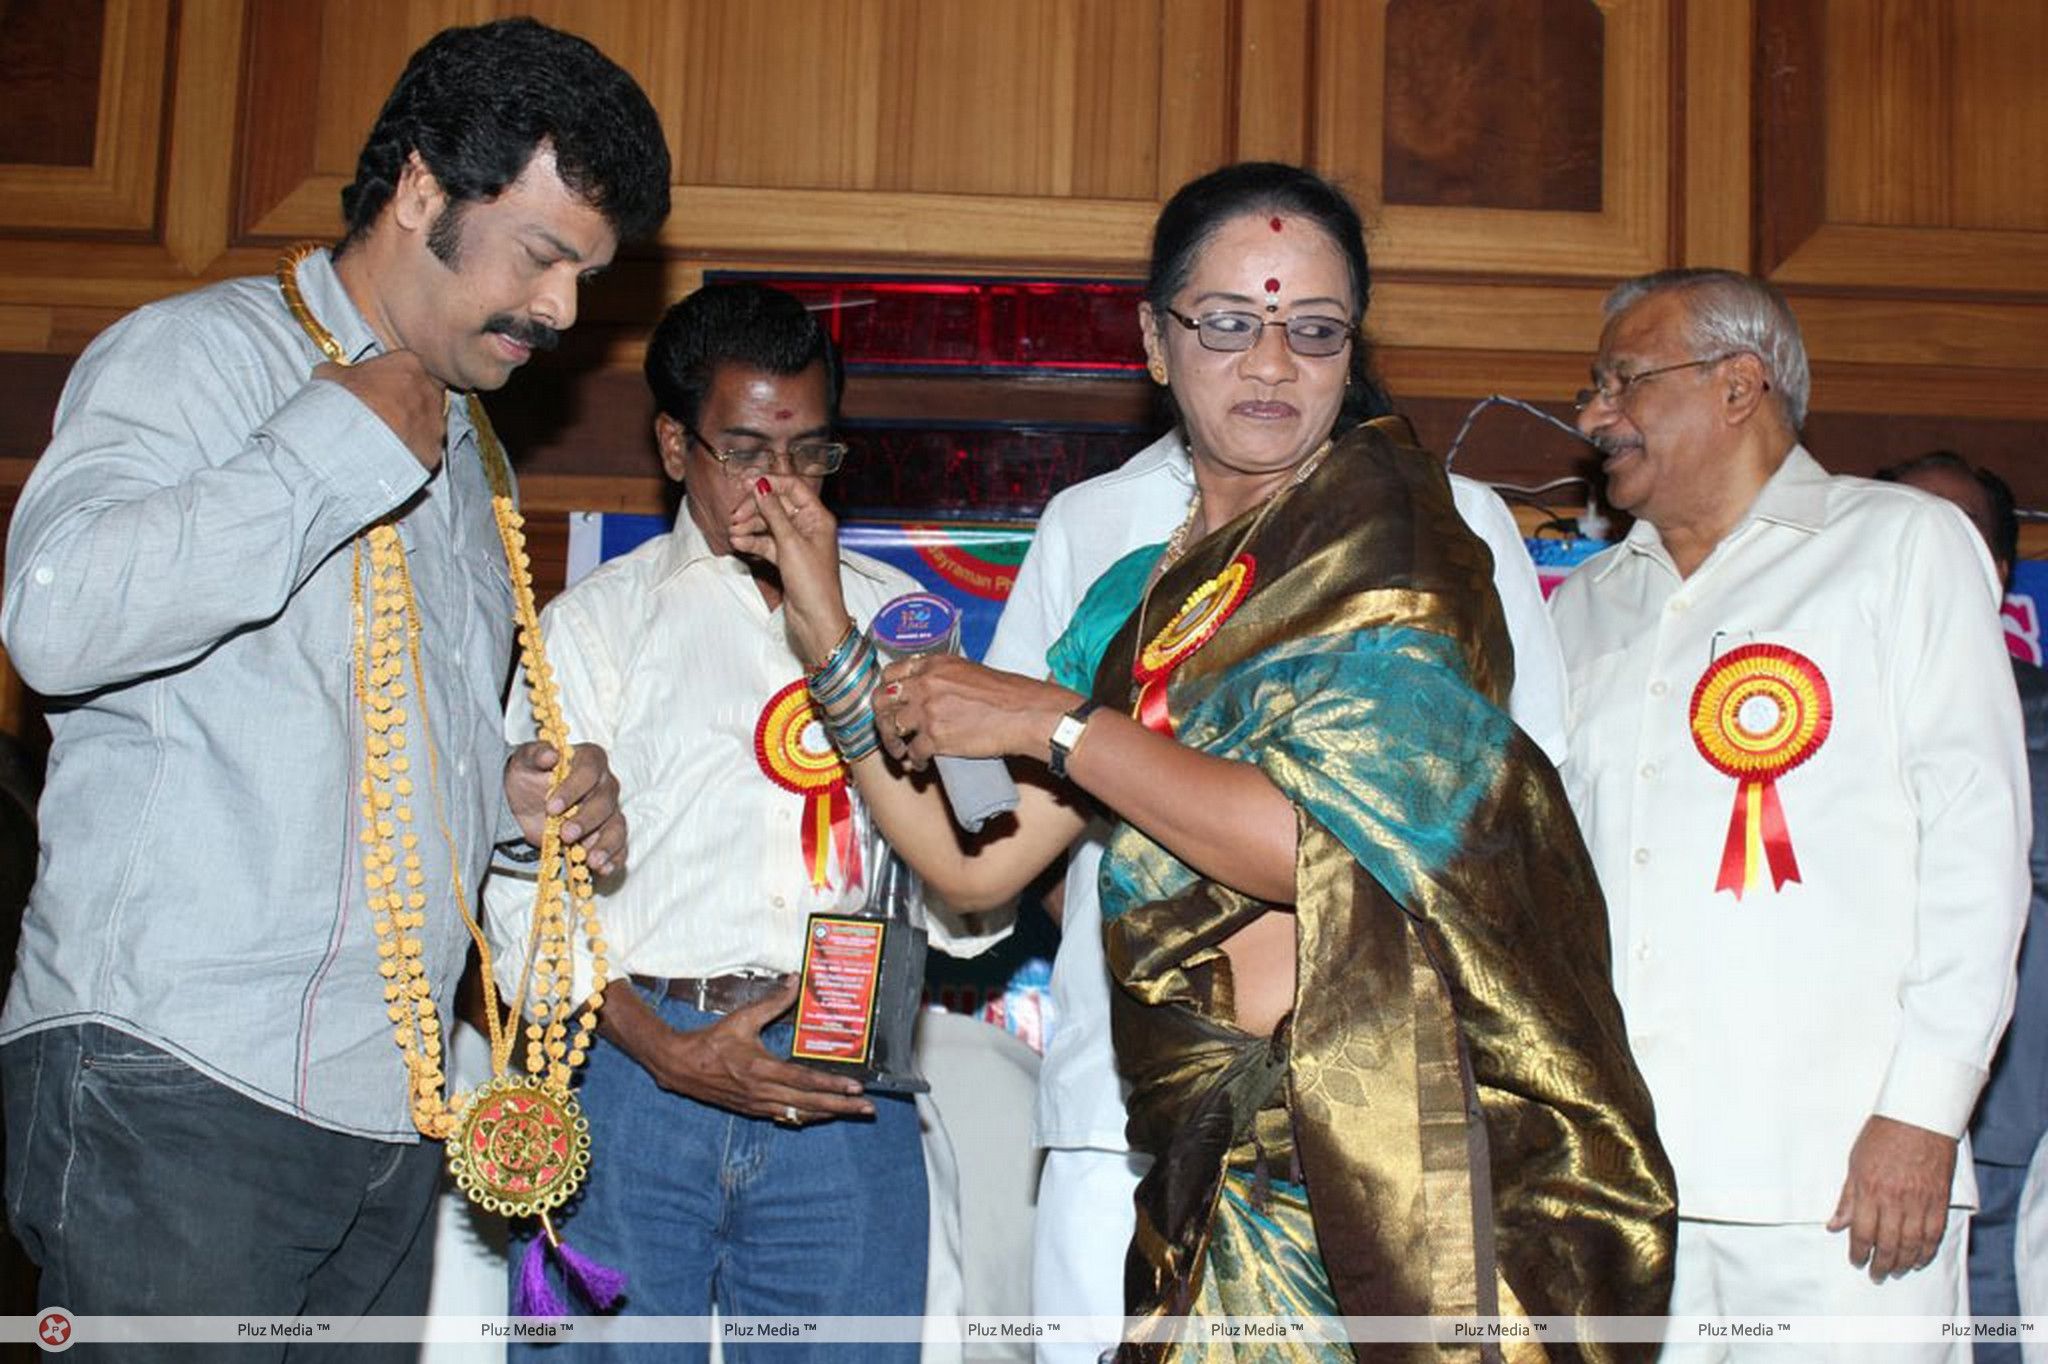 Benze Vaccations Club Awards 2013 Stills | Picture 354494